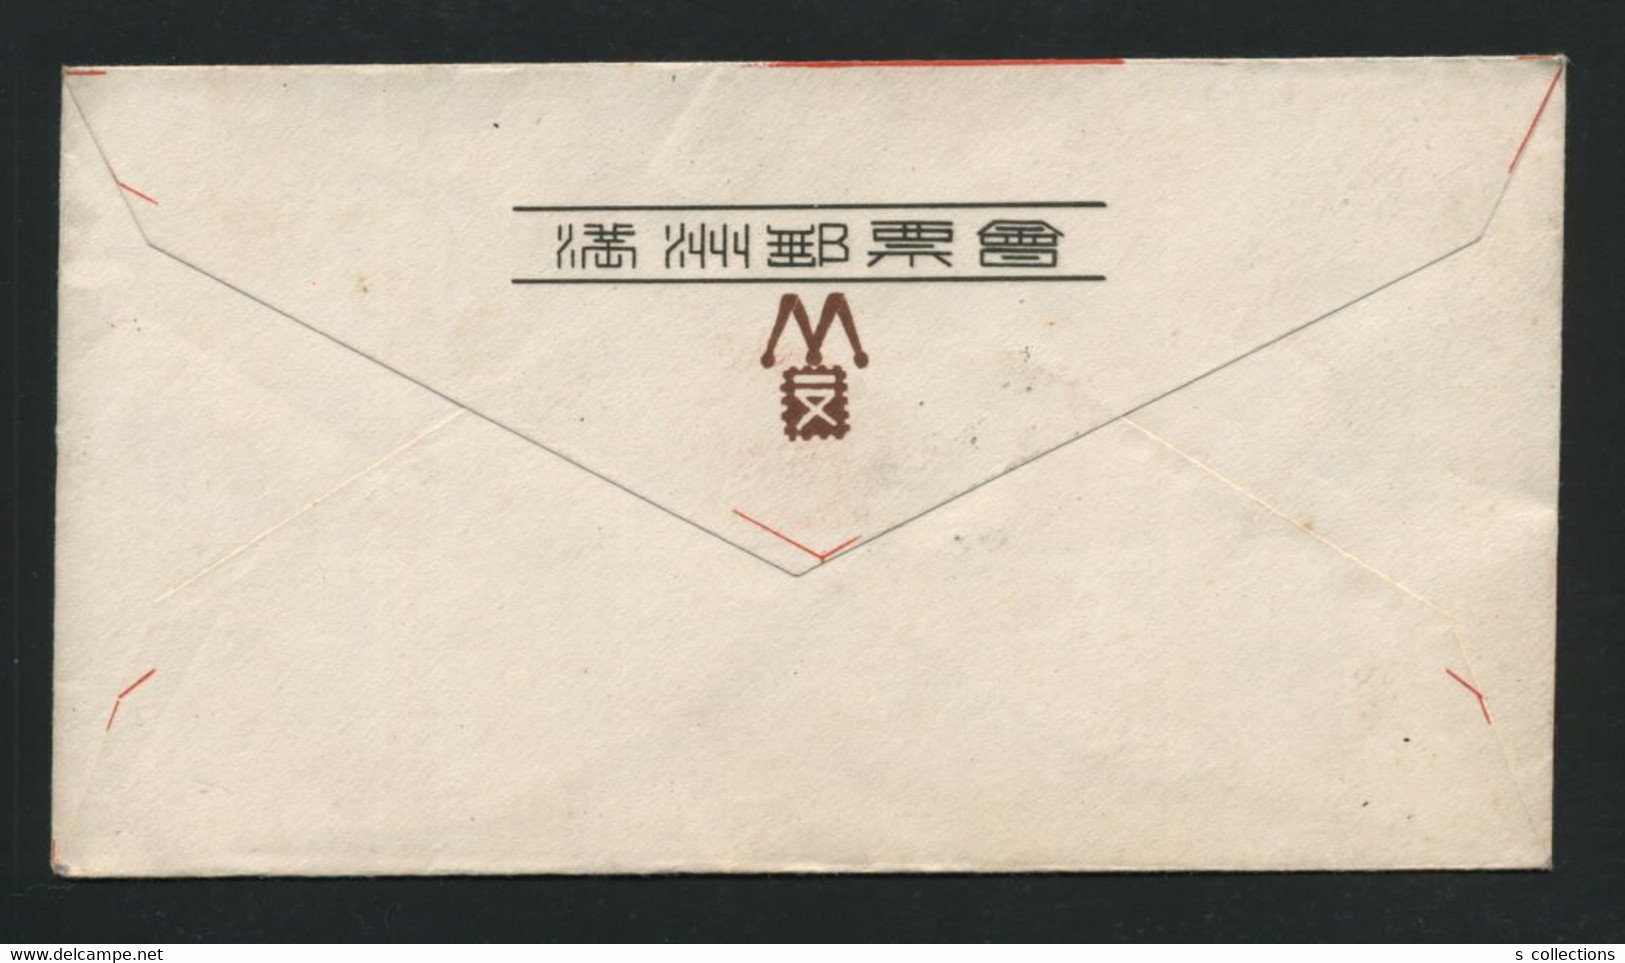 1943 Manchukuo Enforcement Of Labor Service Law FDC Hsinking CPO WW2 Japan China Chine Japon Gippone Manchuria WWII - 1932-45 Mandchourie (Mandchoukouo)